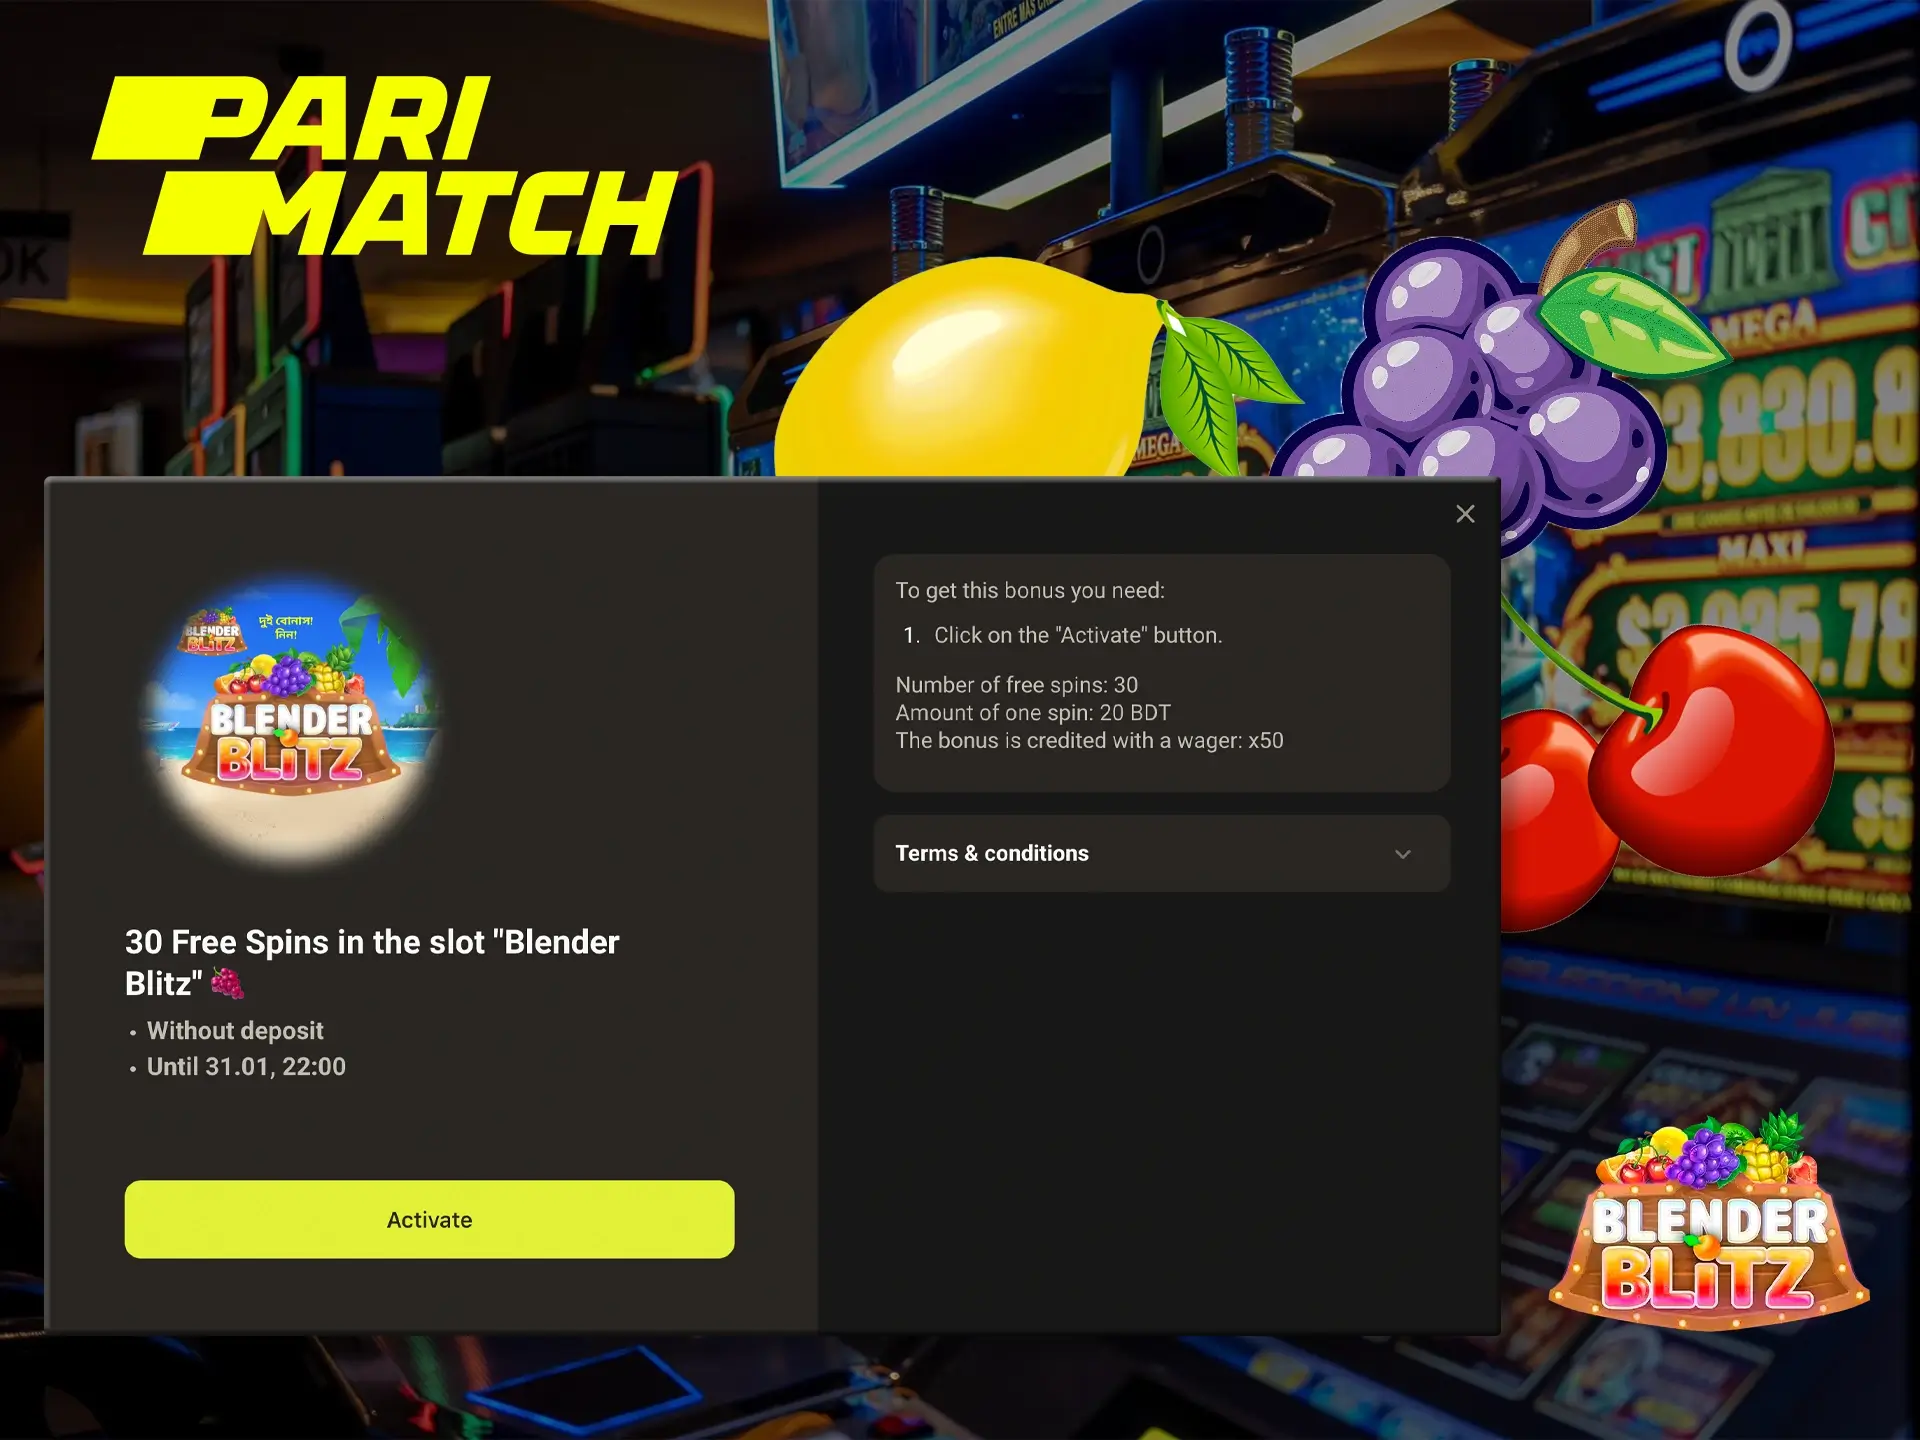 Already at the start of your casino game you get free spins in slots, and that says a lot about Parimatch and its reputation.